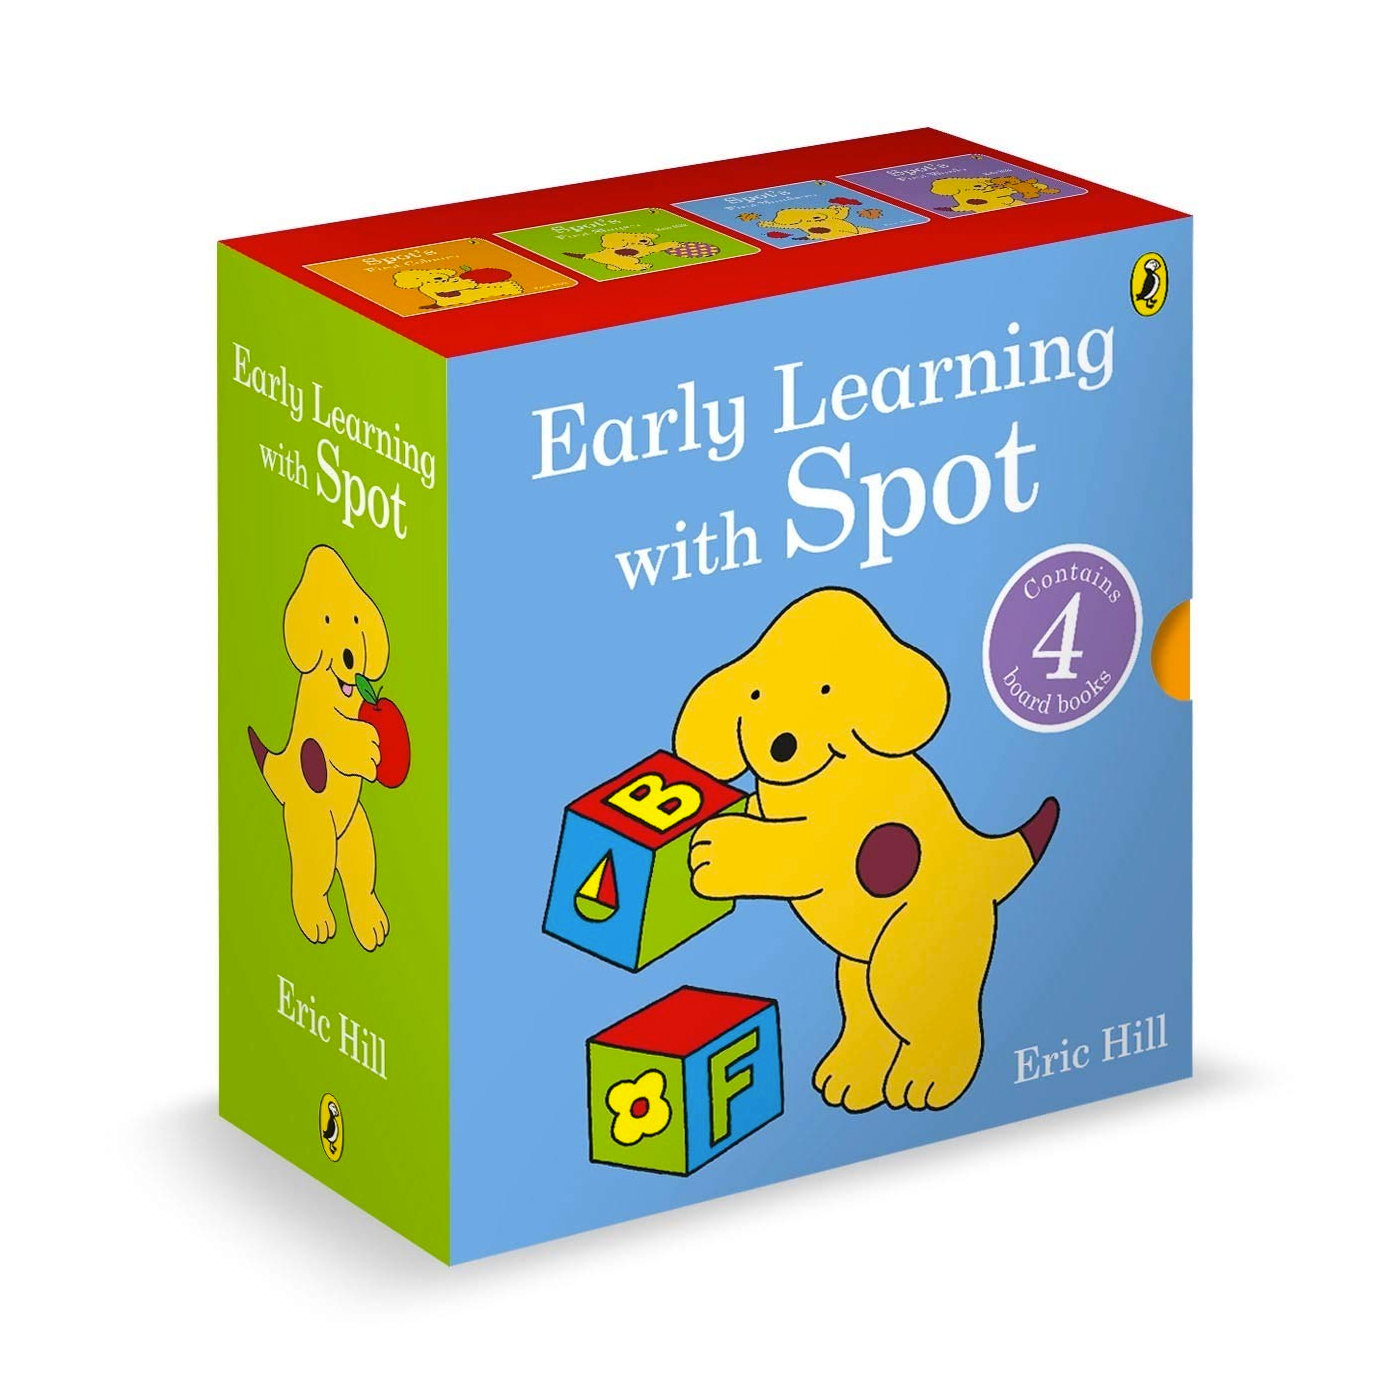  Early Learning with Spot